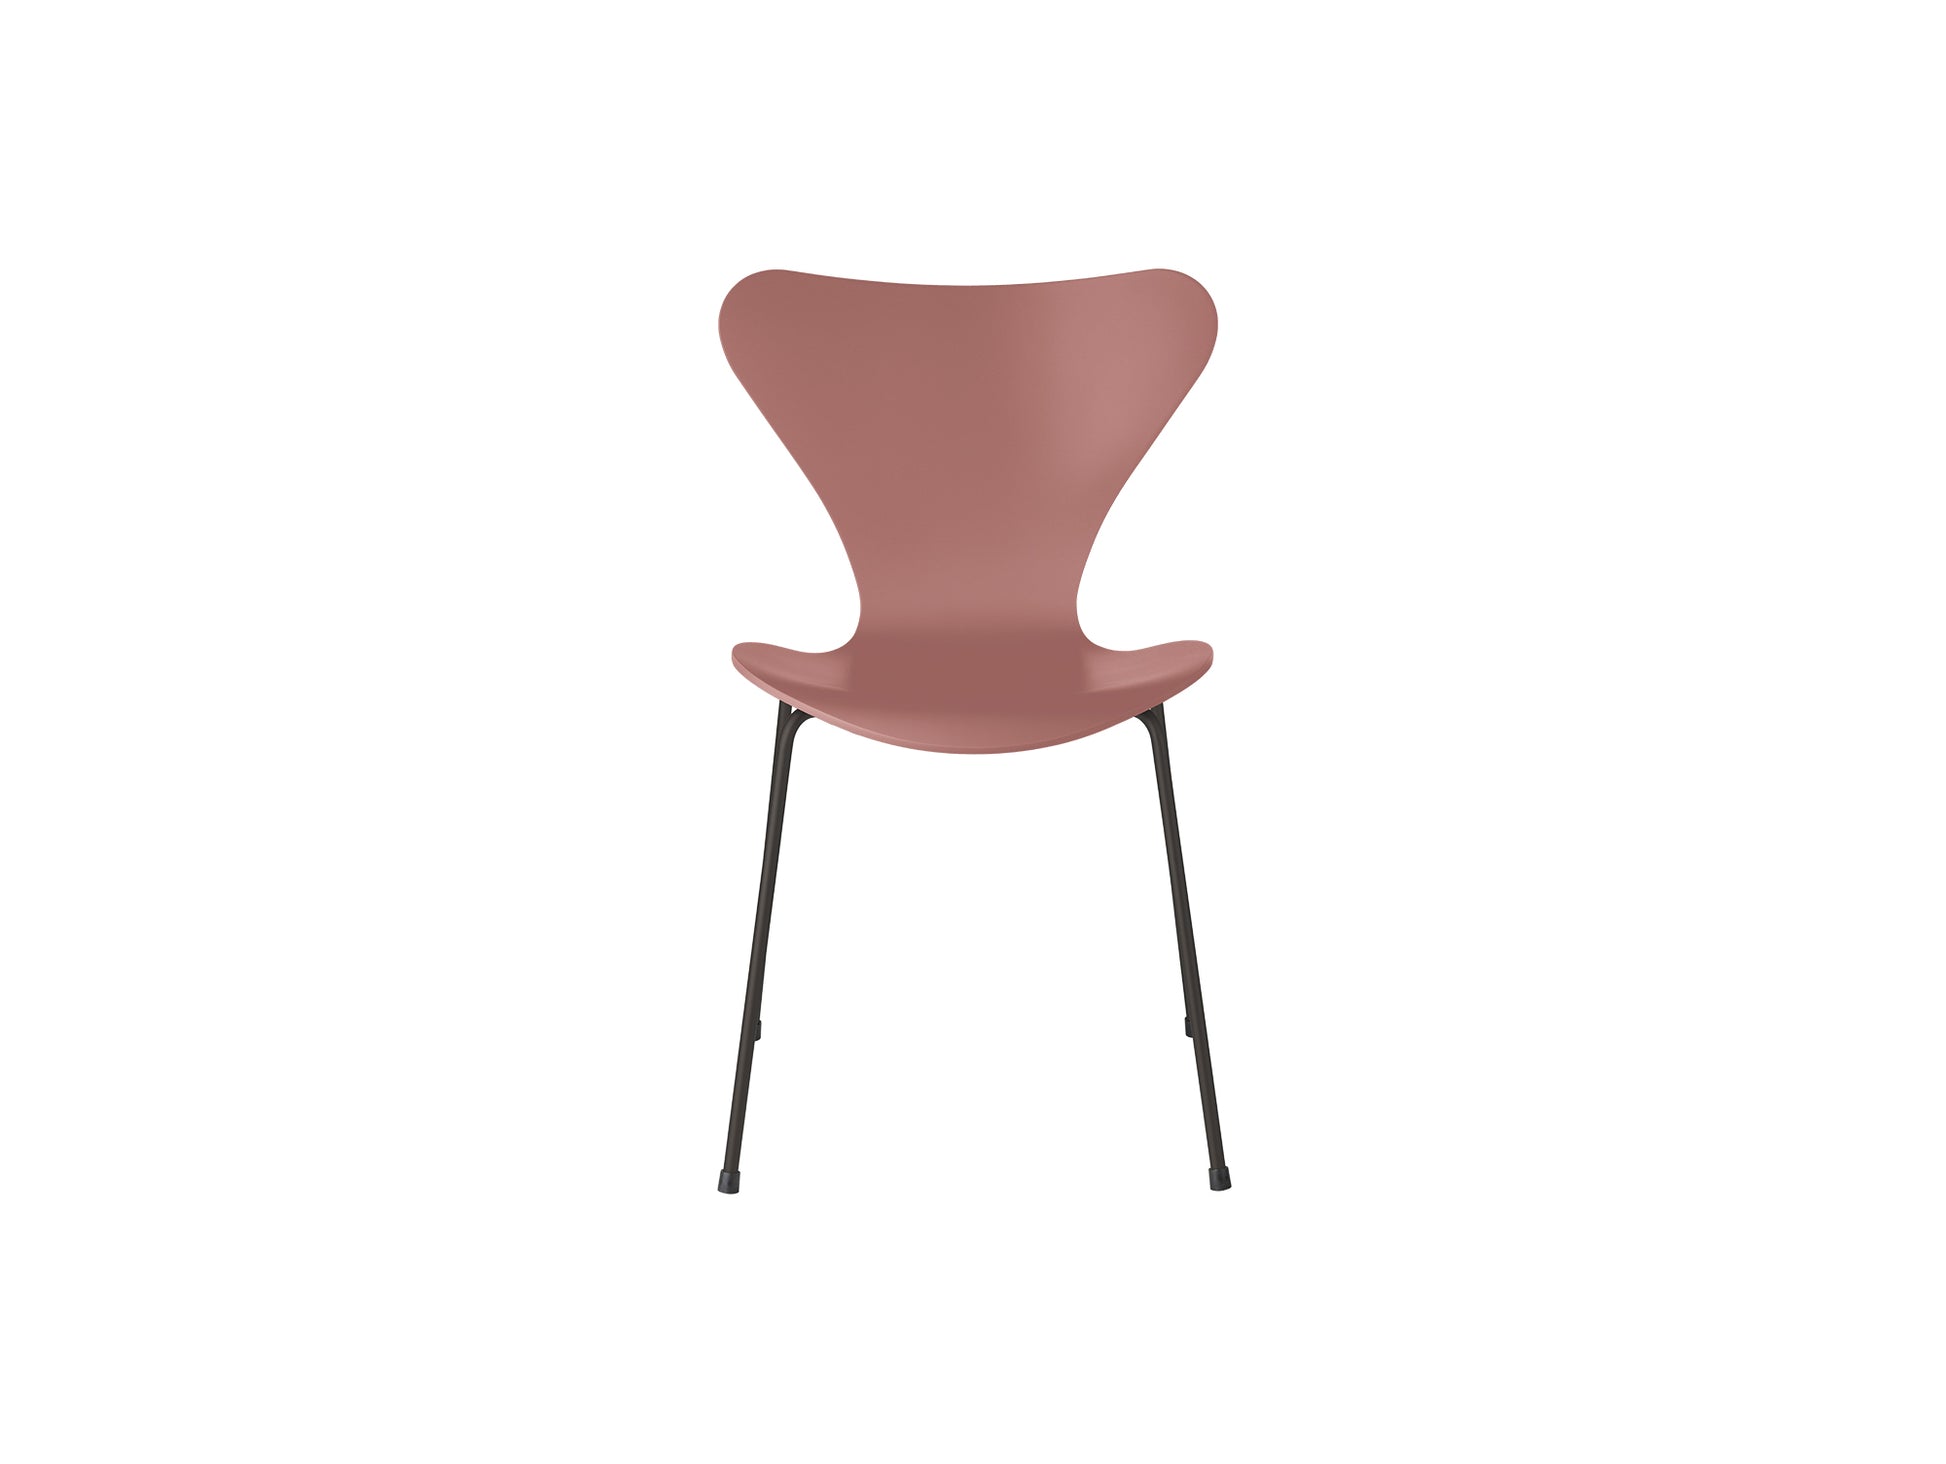 Series 7™ 3107 Dining Chair by Fritz Hansen - Wild Rose Lacquered Veneer Shell / Warm Graphite Steel